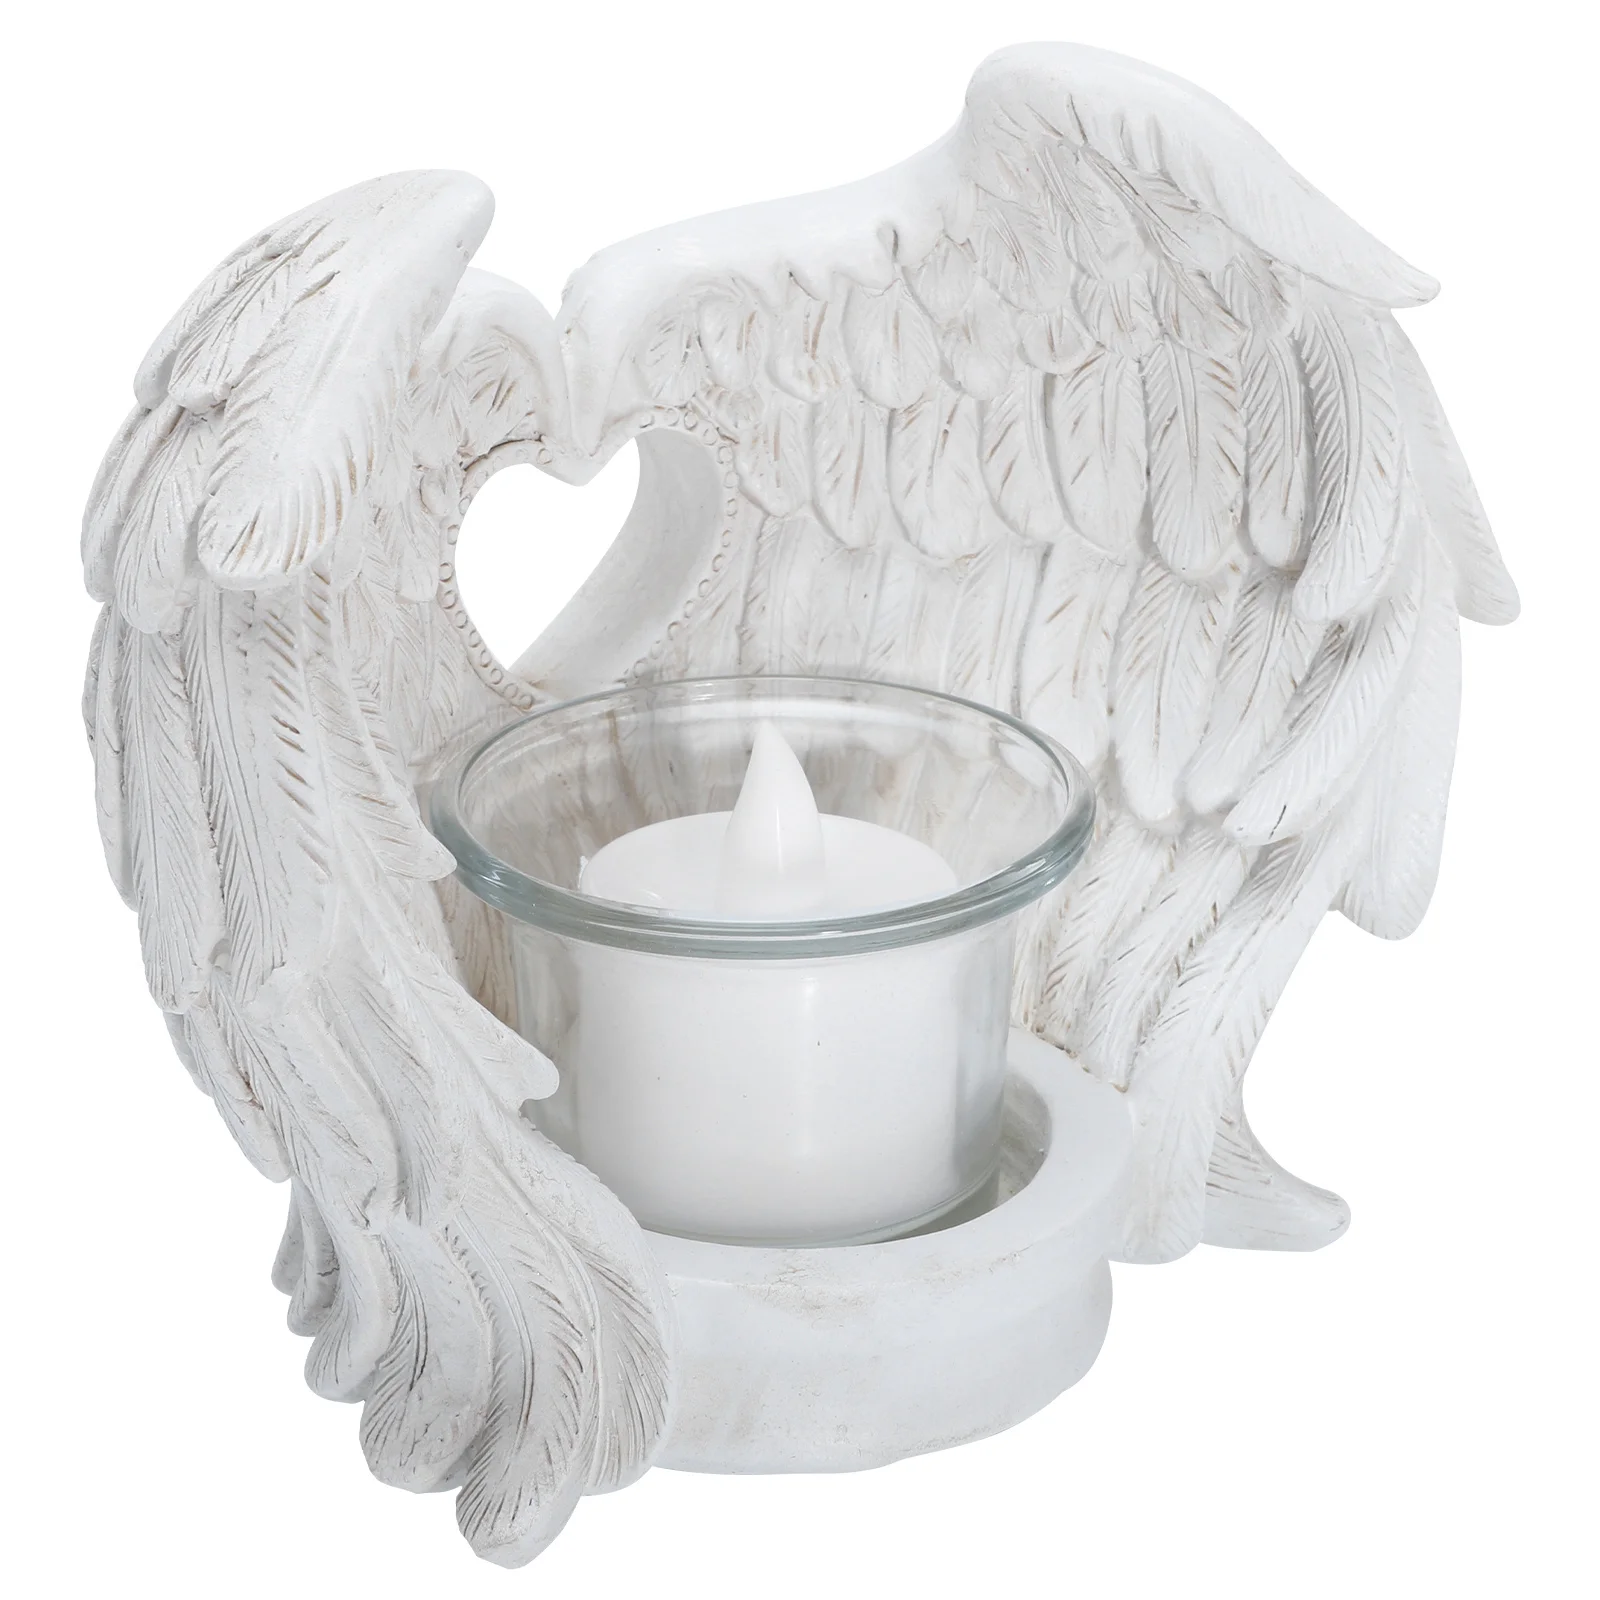 

Candles Angel Candle Battery Wings Operated Holder Taper Flameless Decor Flickering Fake Wall Powered Light Memorial Tea Led